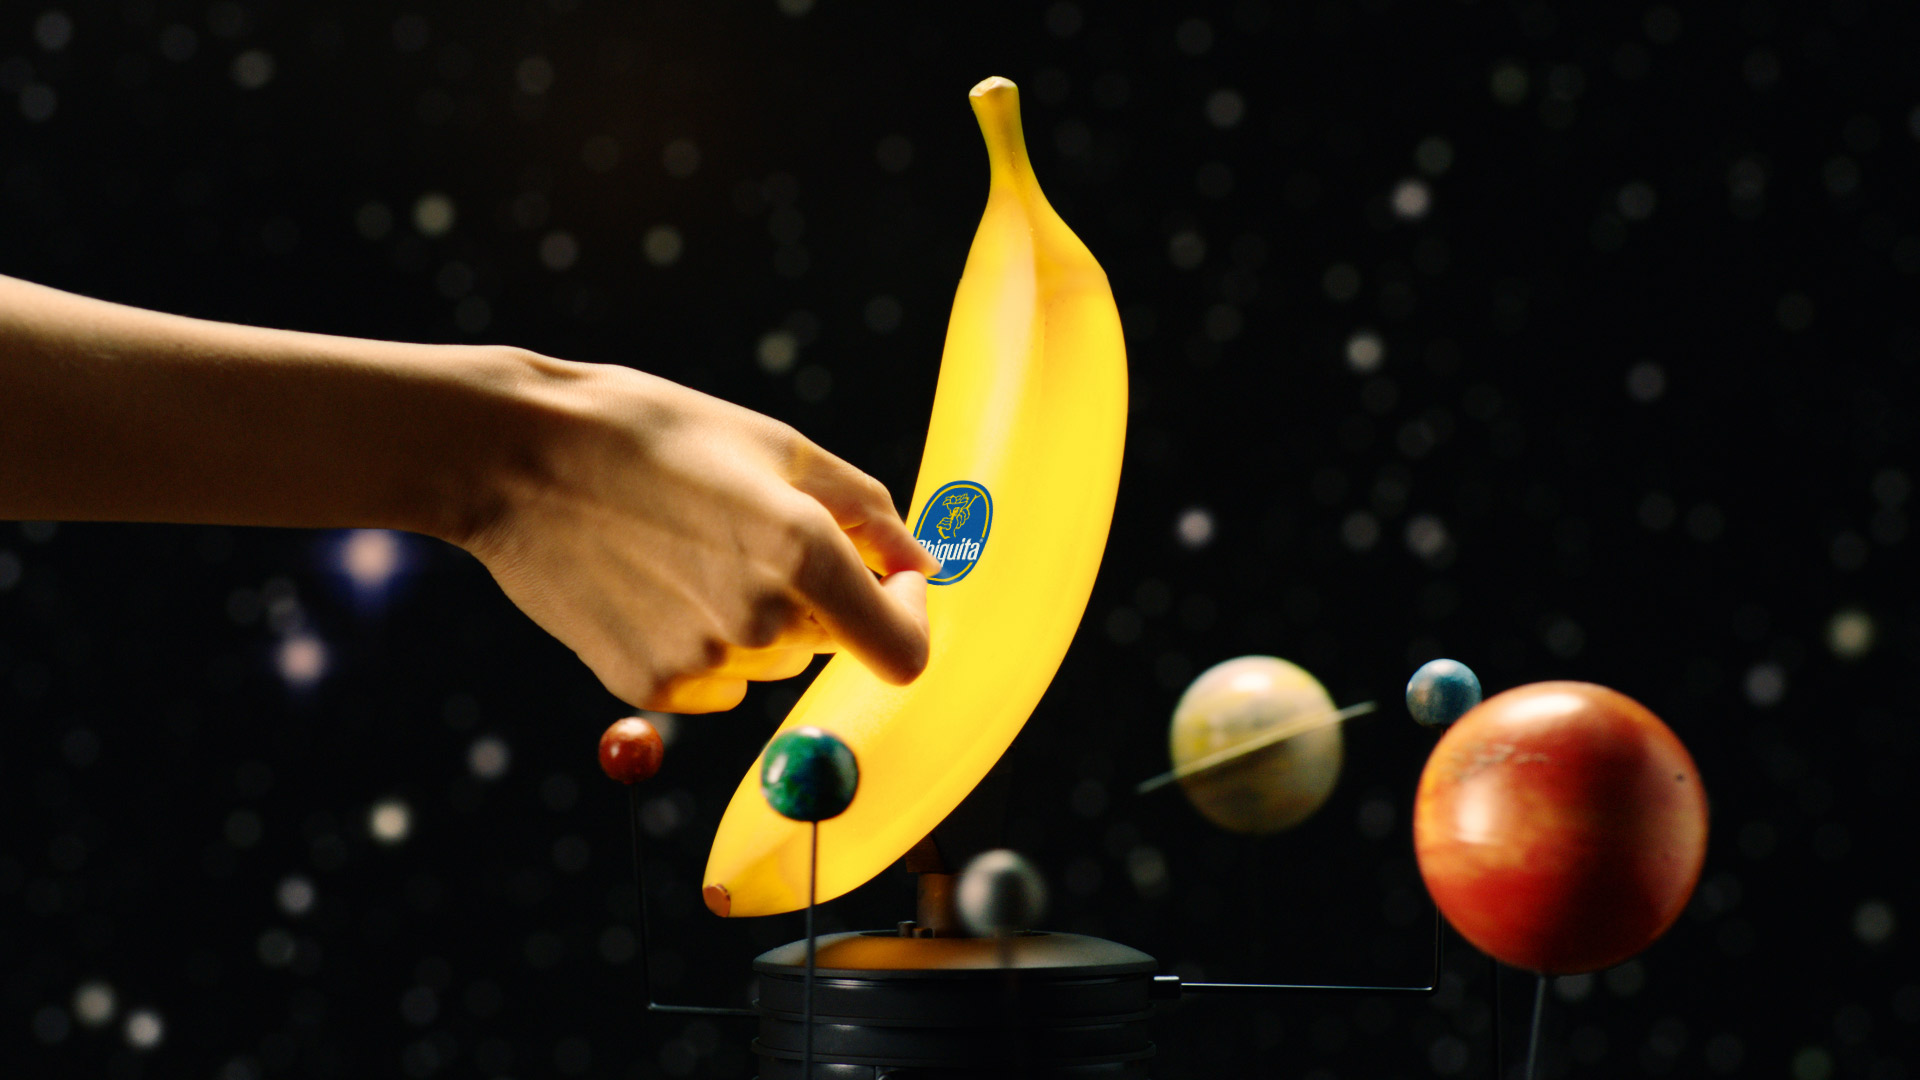 Celebrate the Banana sun with the shortest night of your life